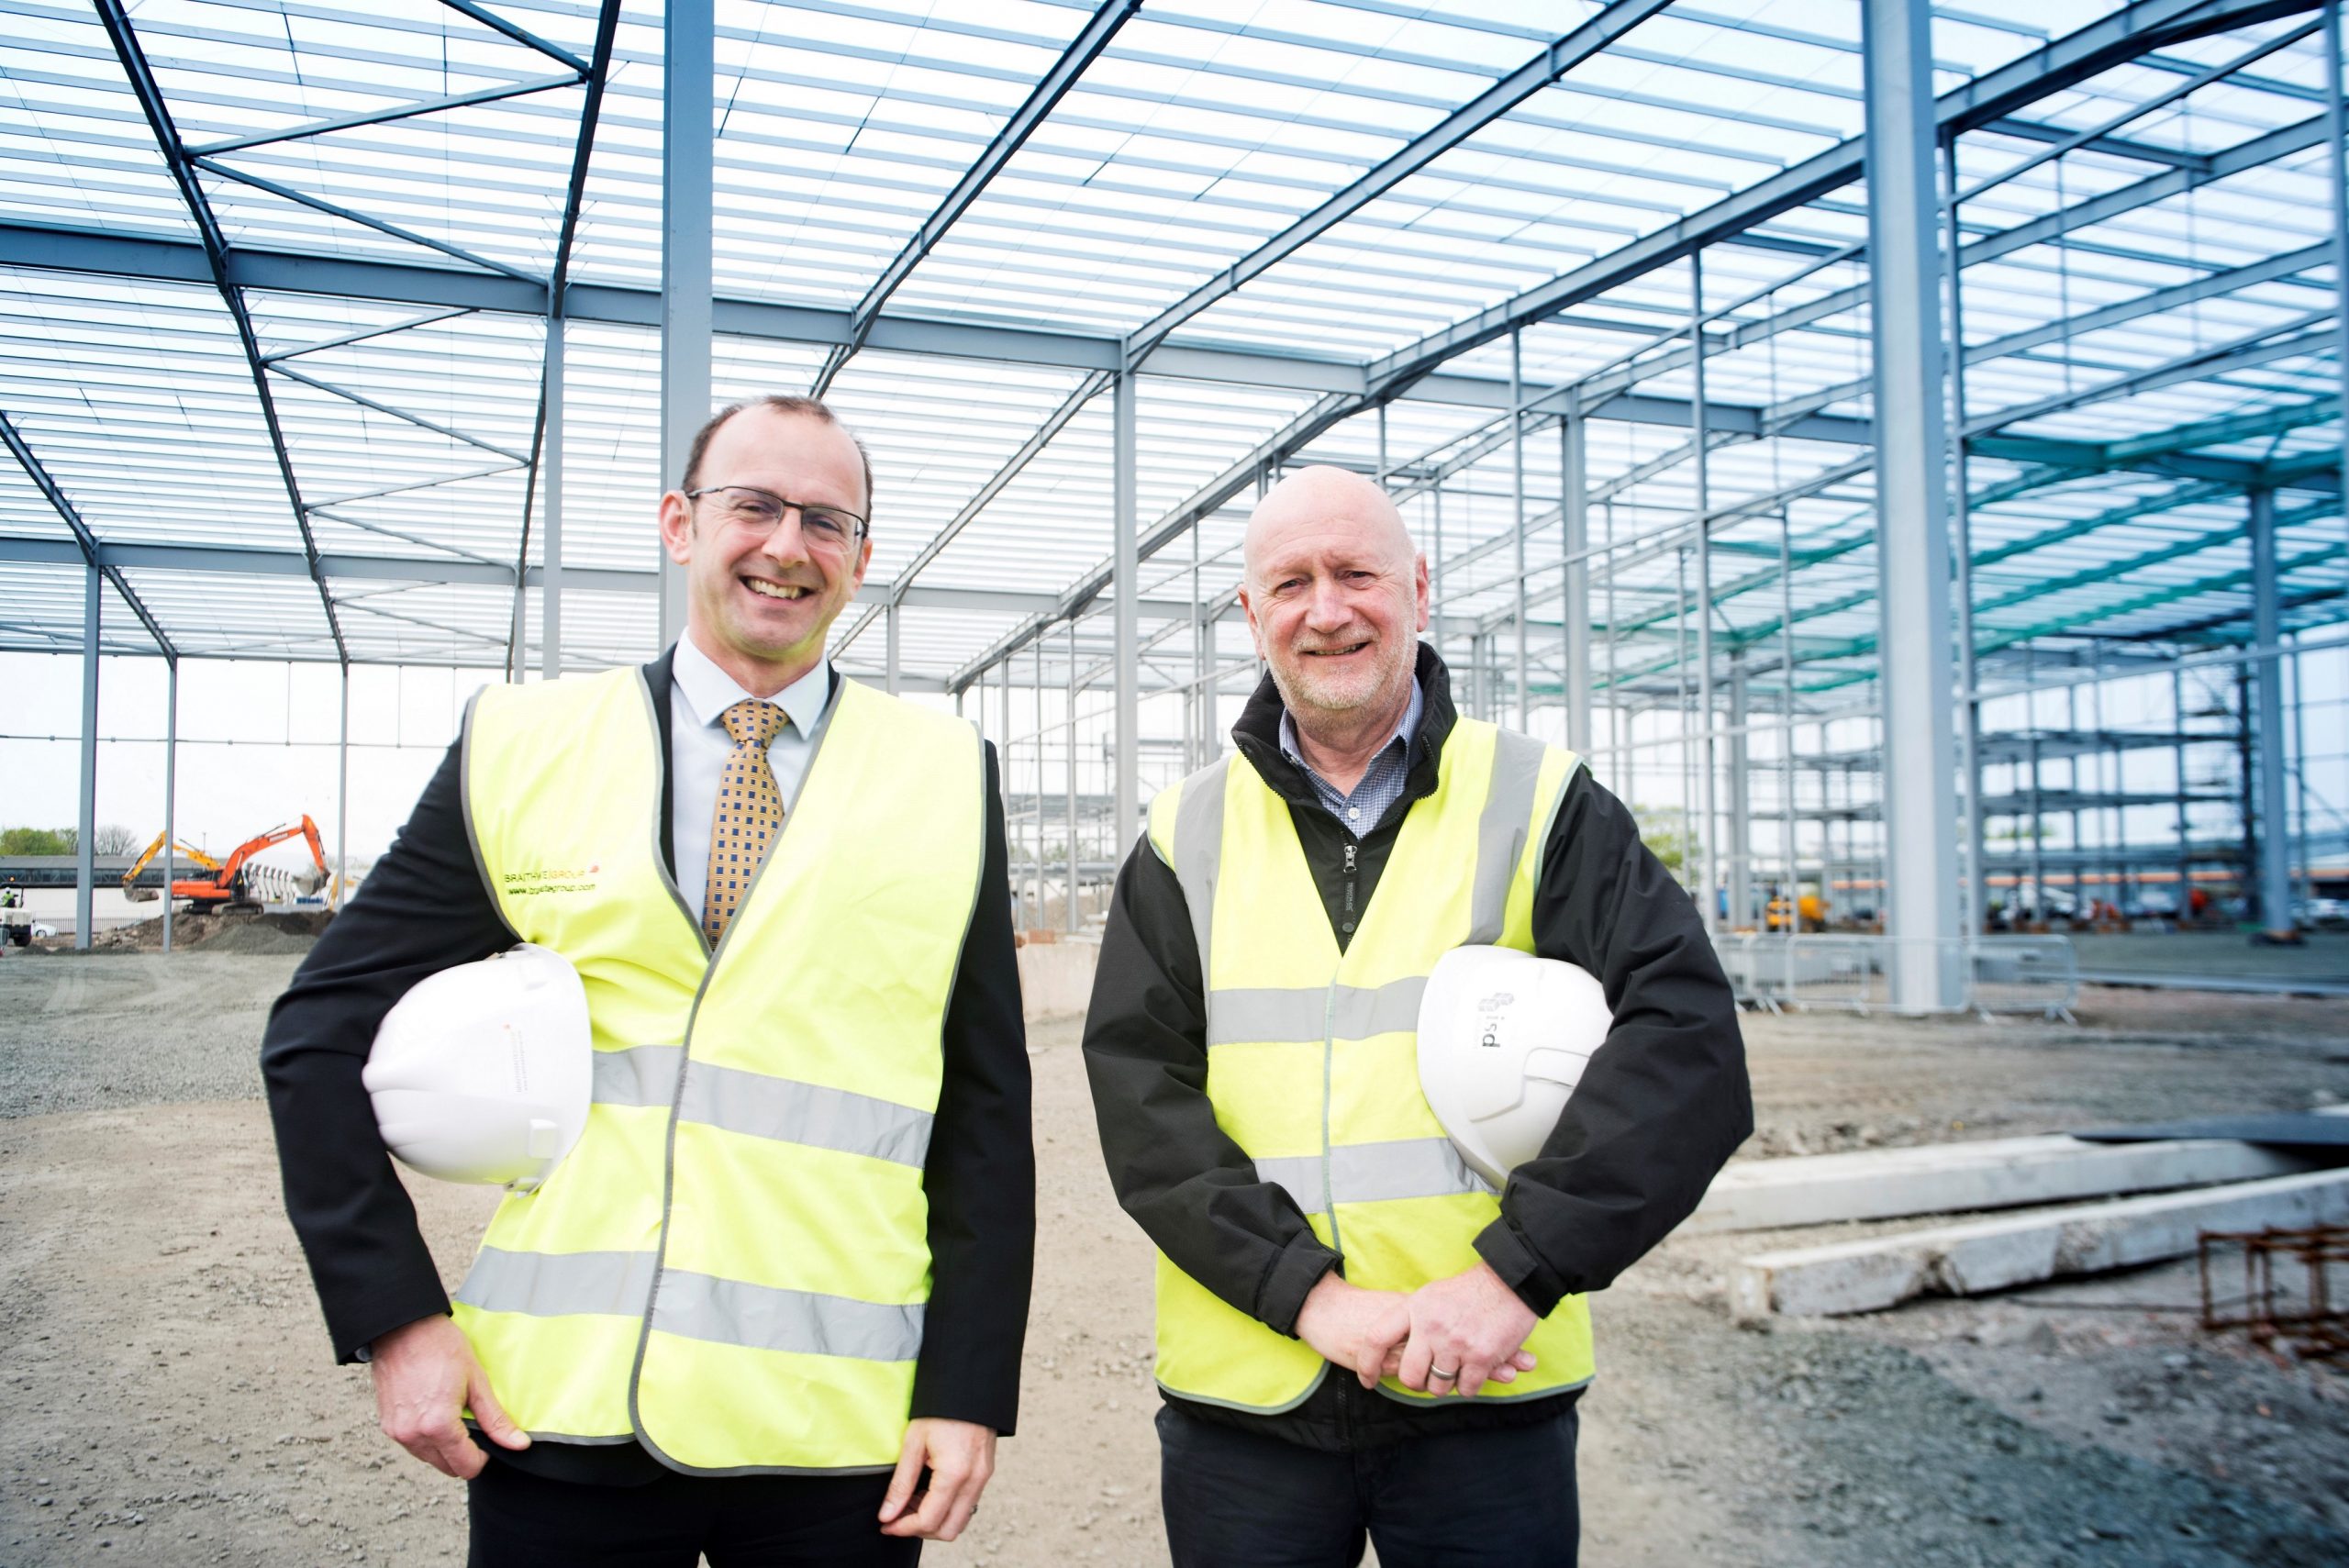 https://www.turnthetablespr.com/app/uploads/2020/05/Willie-Scanlon-of-Farmfoods-left-with-Richard-Bowden-of-ISD-solutions_c-1-scaled.jpg